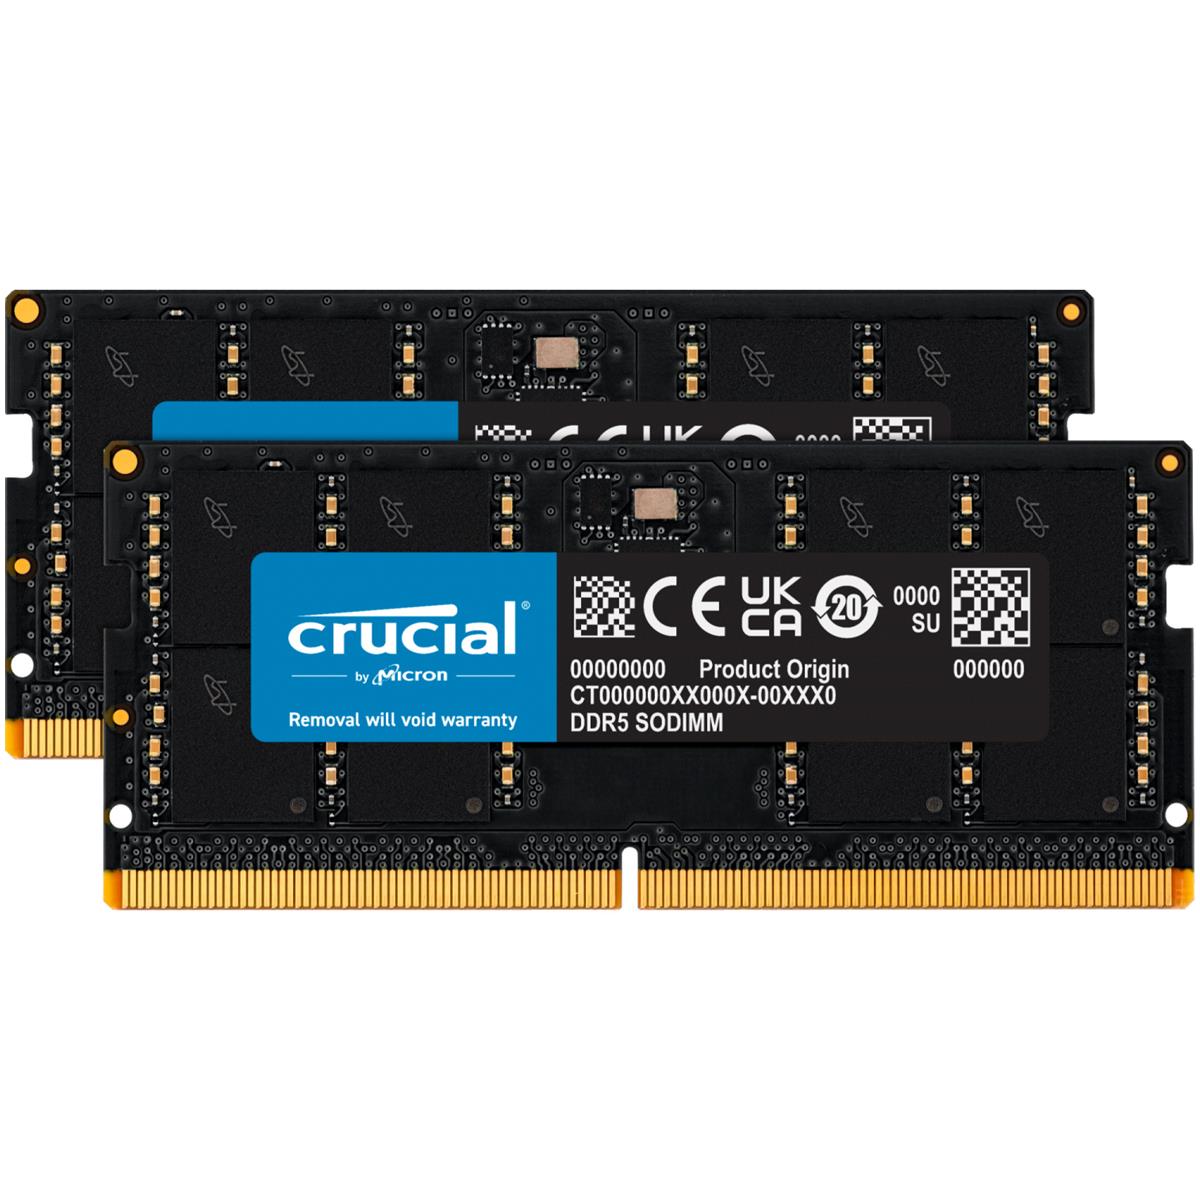 Image of Crucial 32GB (2x16GB) DDR5 4800MT/s CL40 SODIMM Memory Module Kit